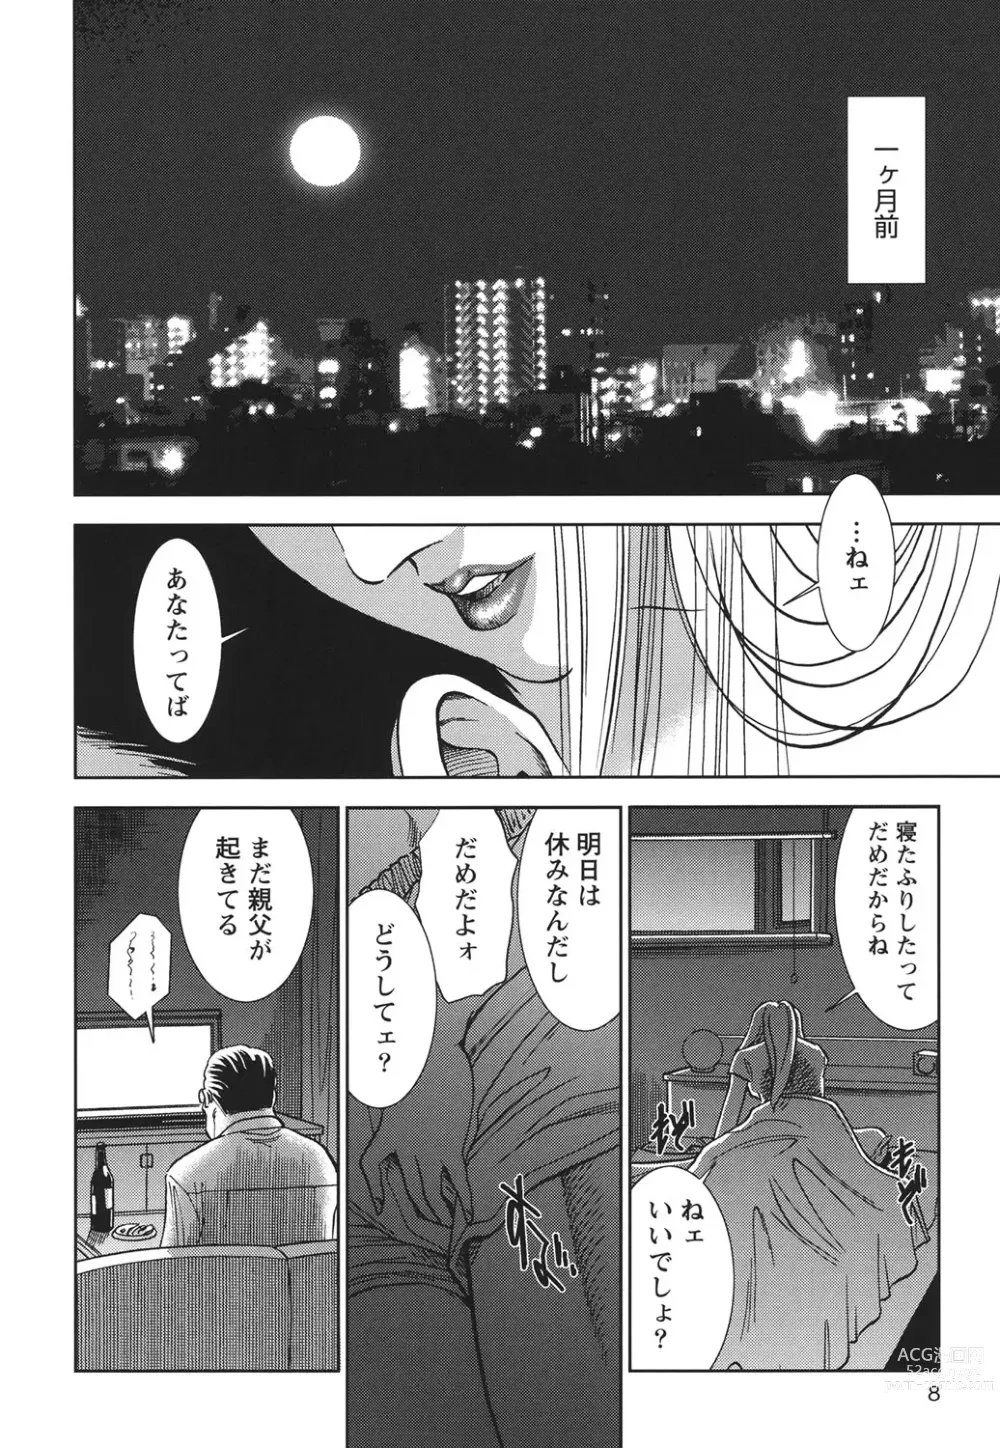 Page 7 of manga Haitoku no Meikyuu - a married woman got lost in the labyrinth of immorality